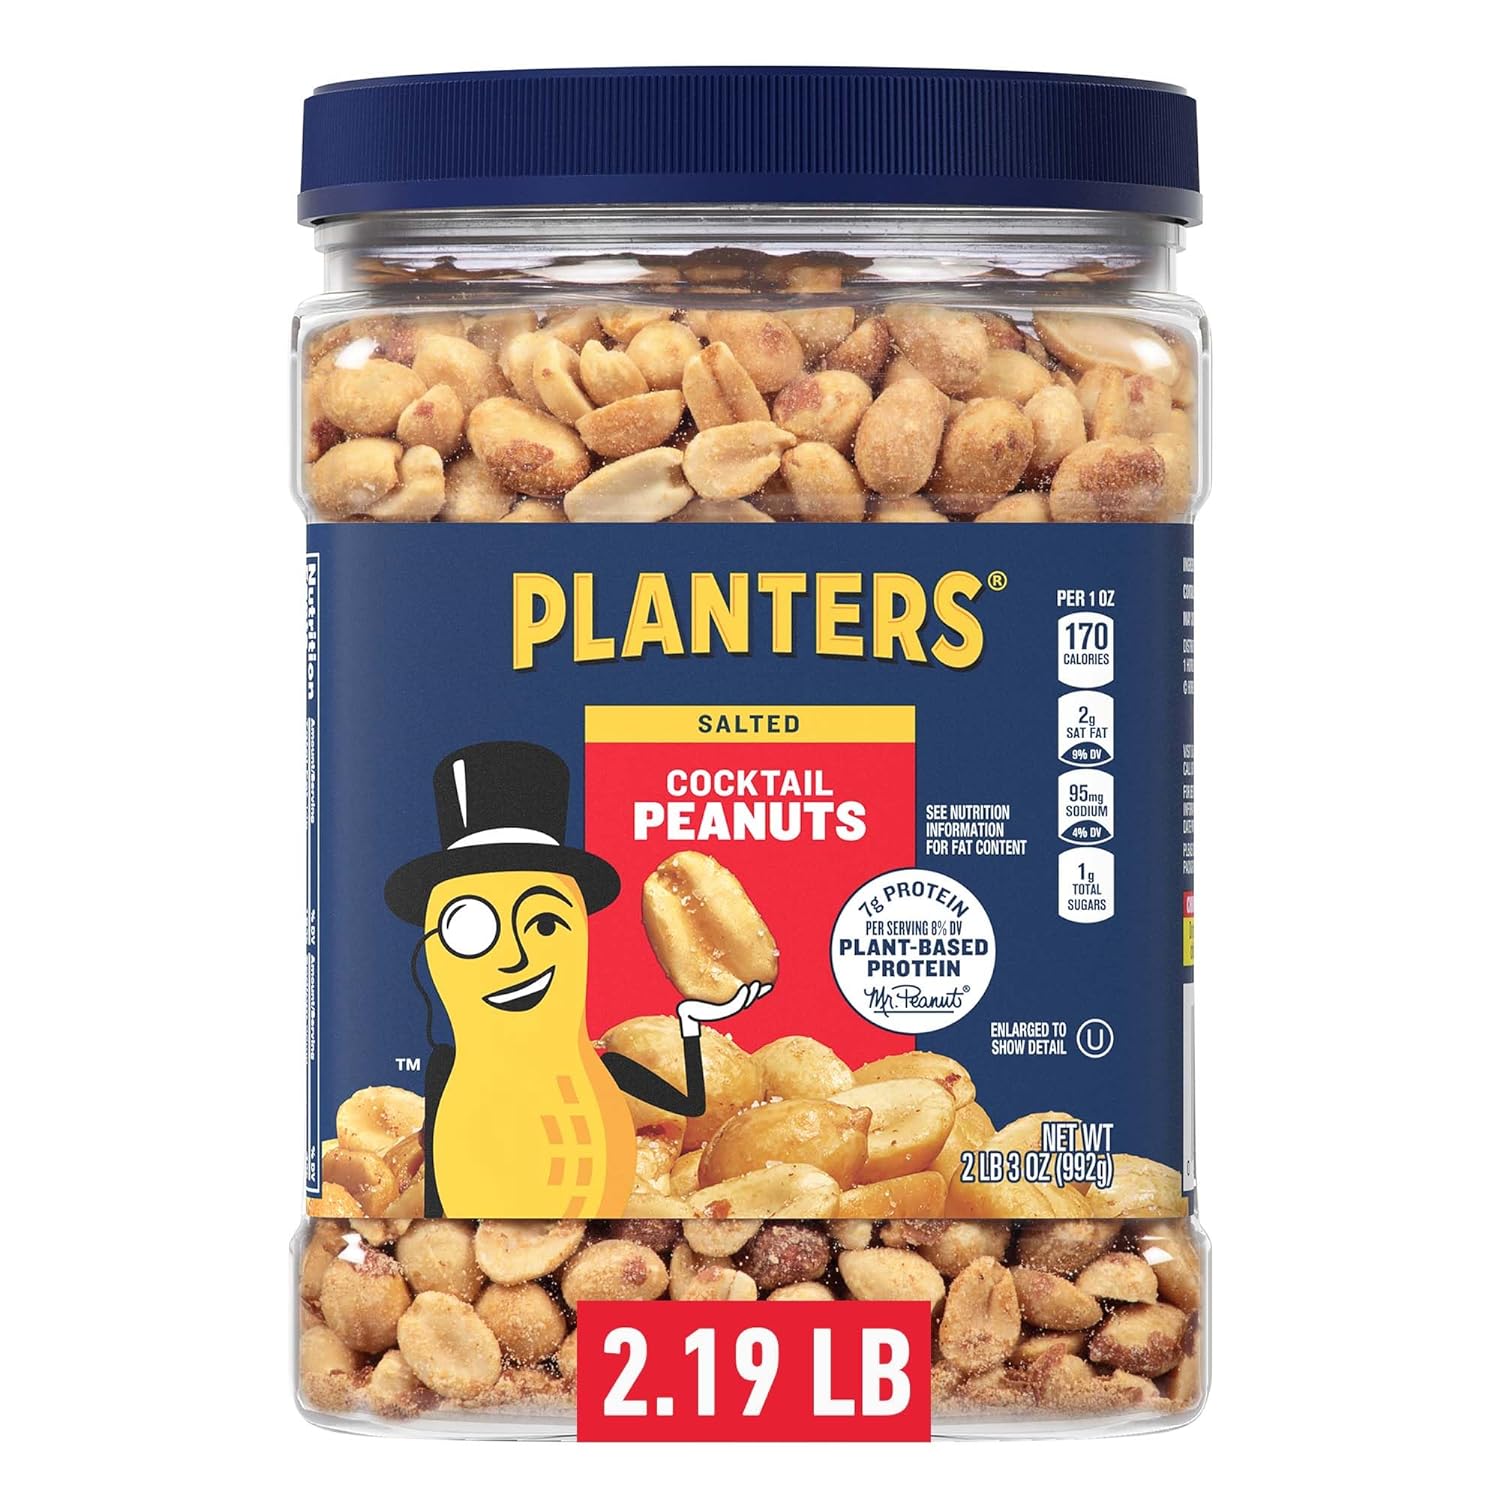 I buy this bulk pack regularly because it's a great value considering the price per oz of product. It's a great value and the peanuts are delicious. I've been buying these for a few years now.